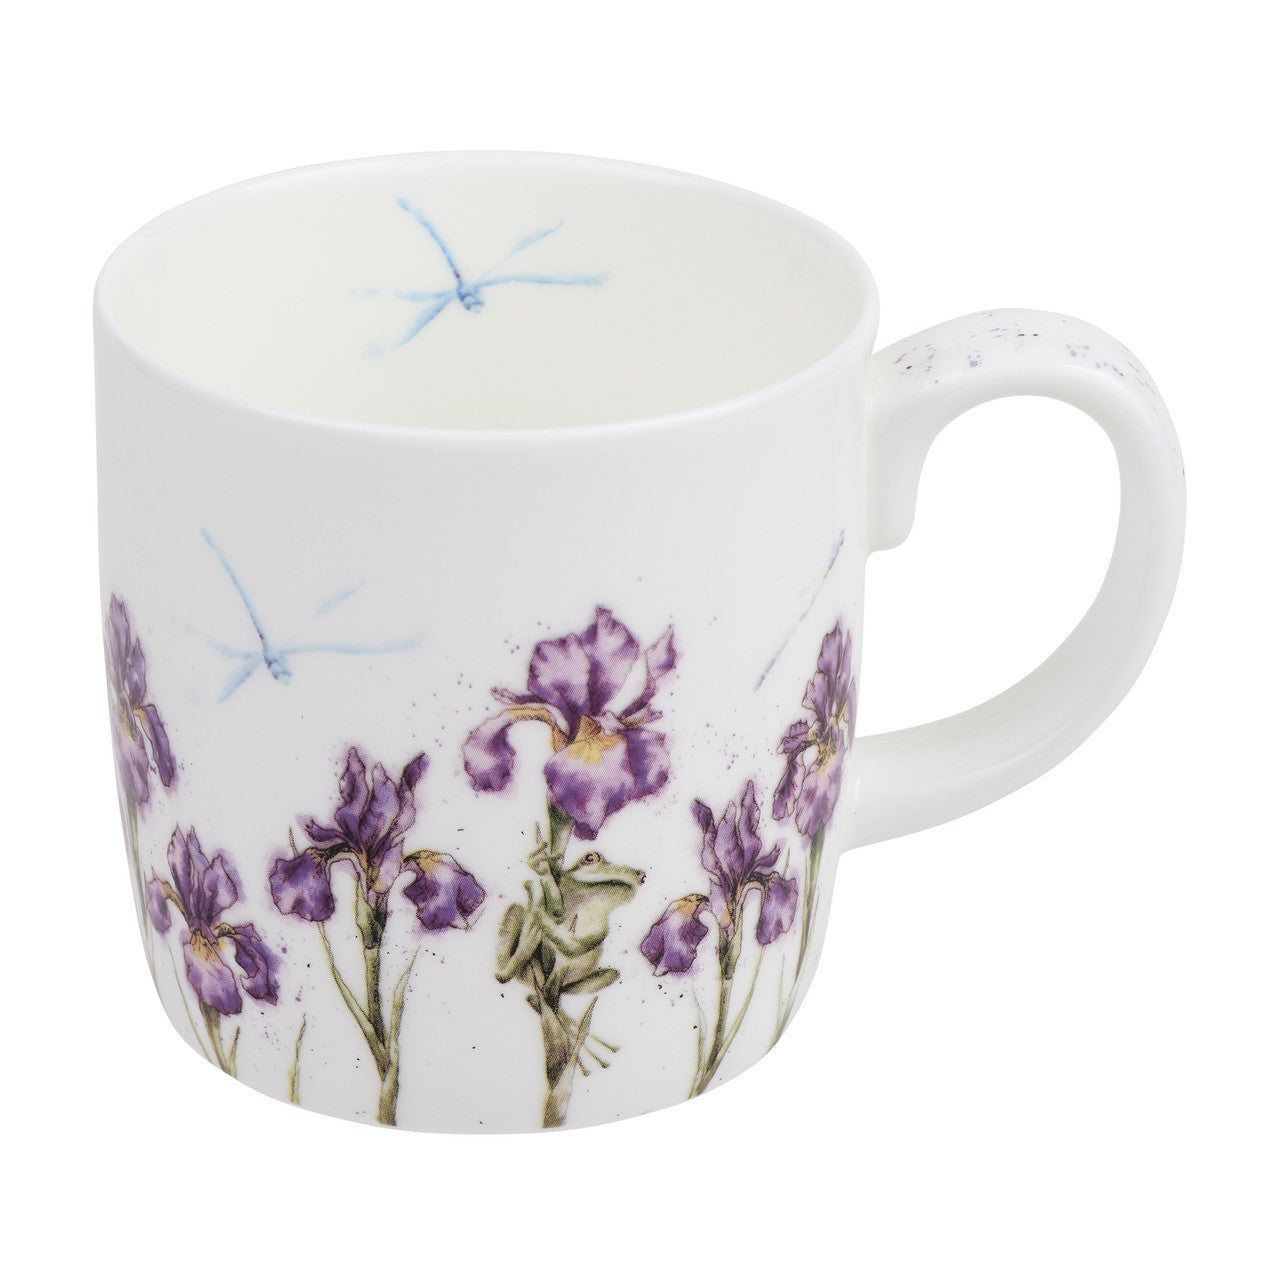 'The Pond Prince' Bone China Mug from Wrendale Designs by Royal Worcester.